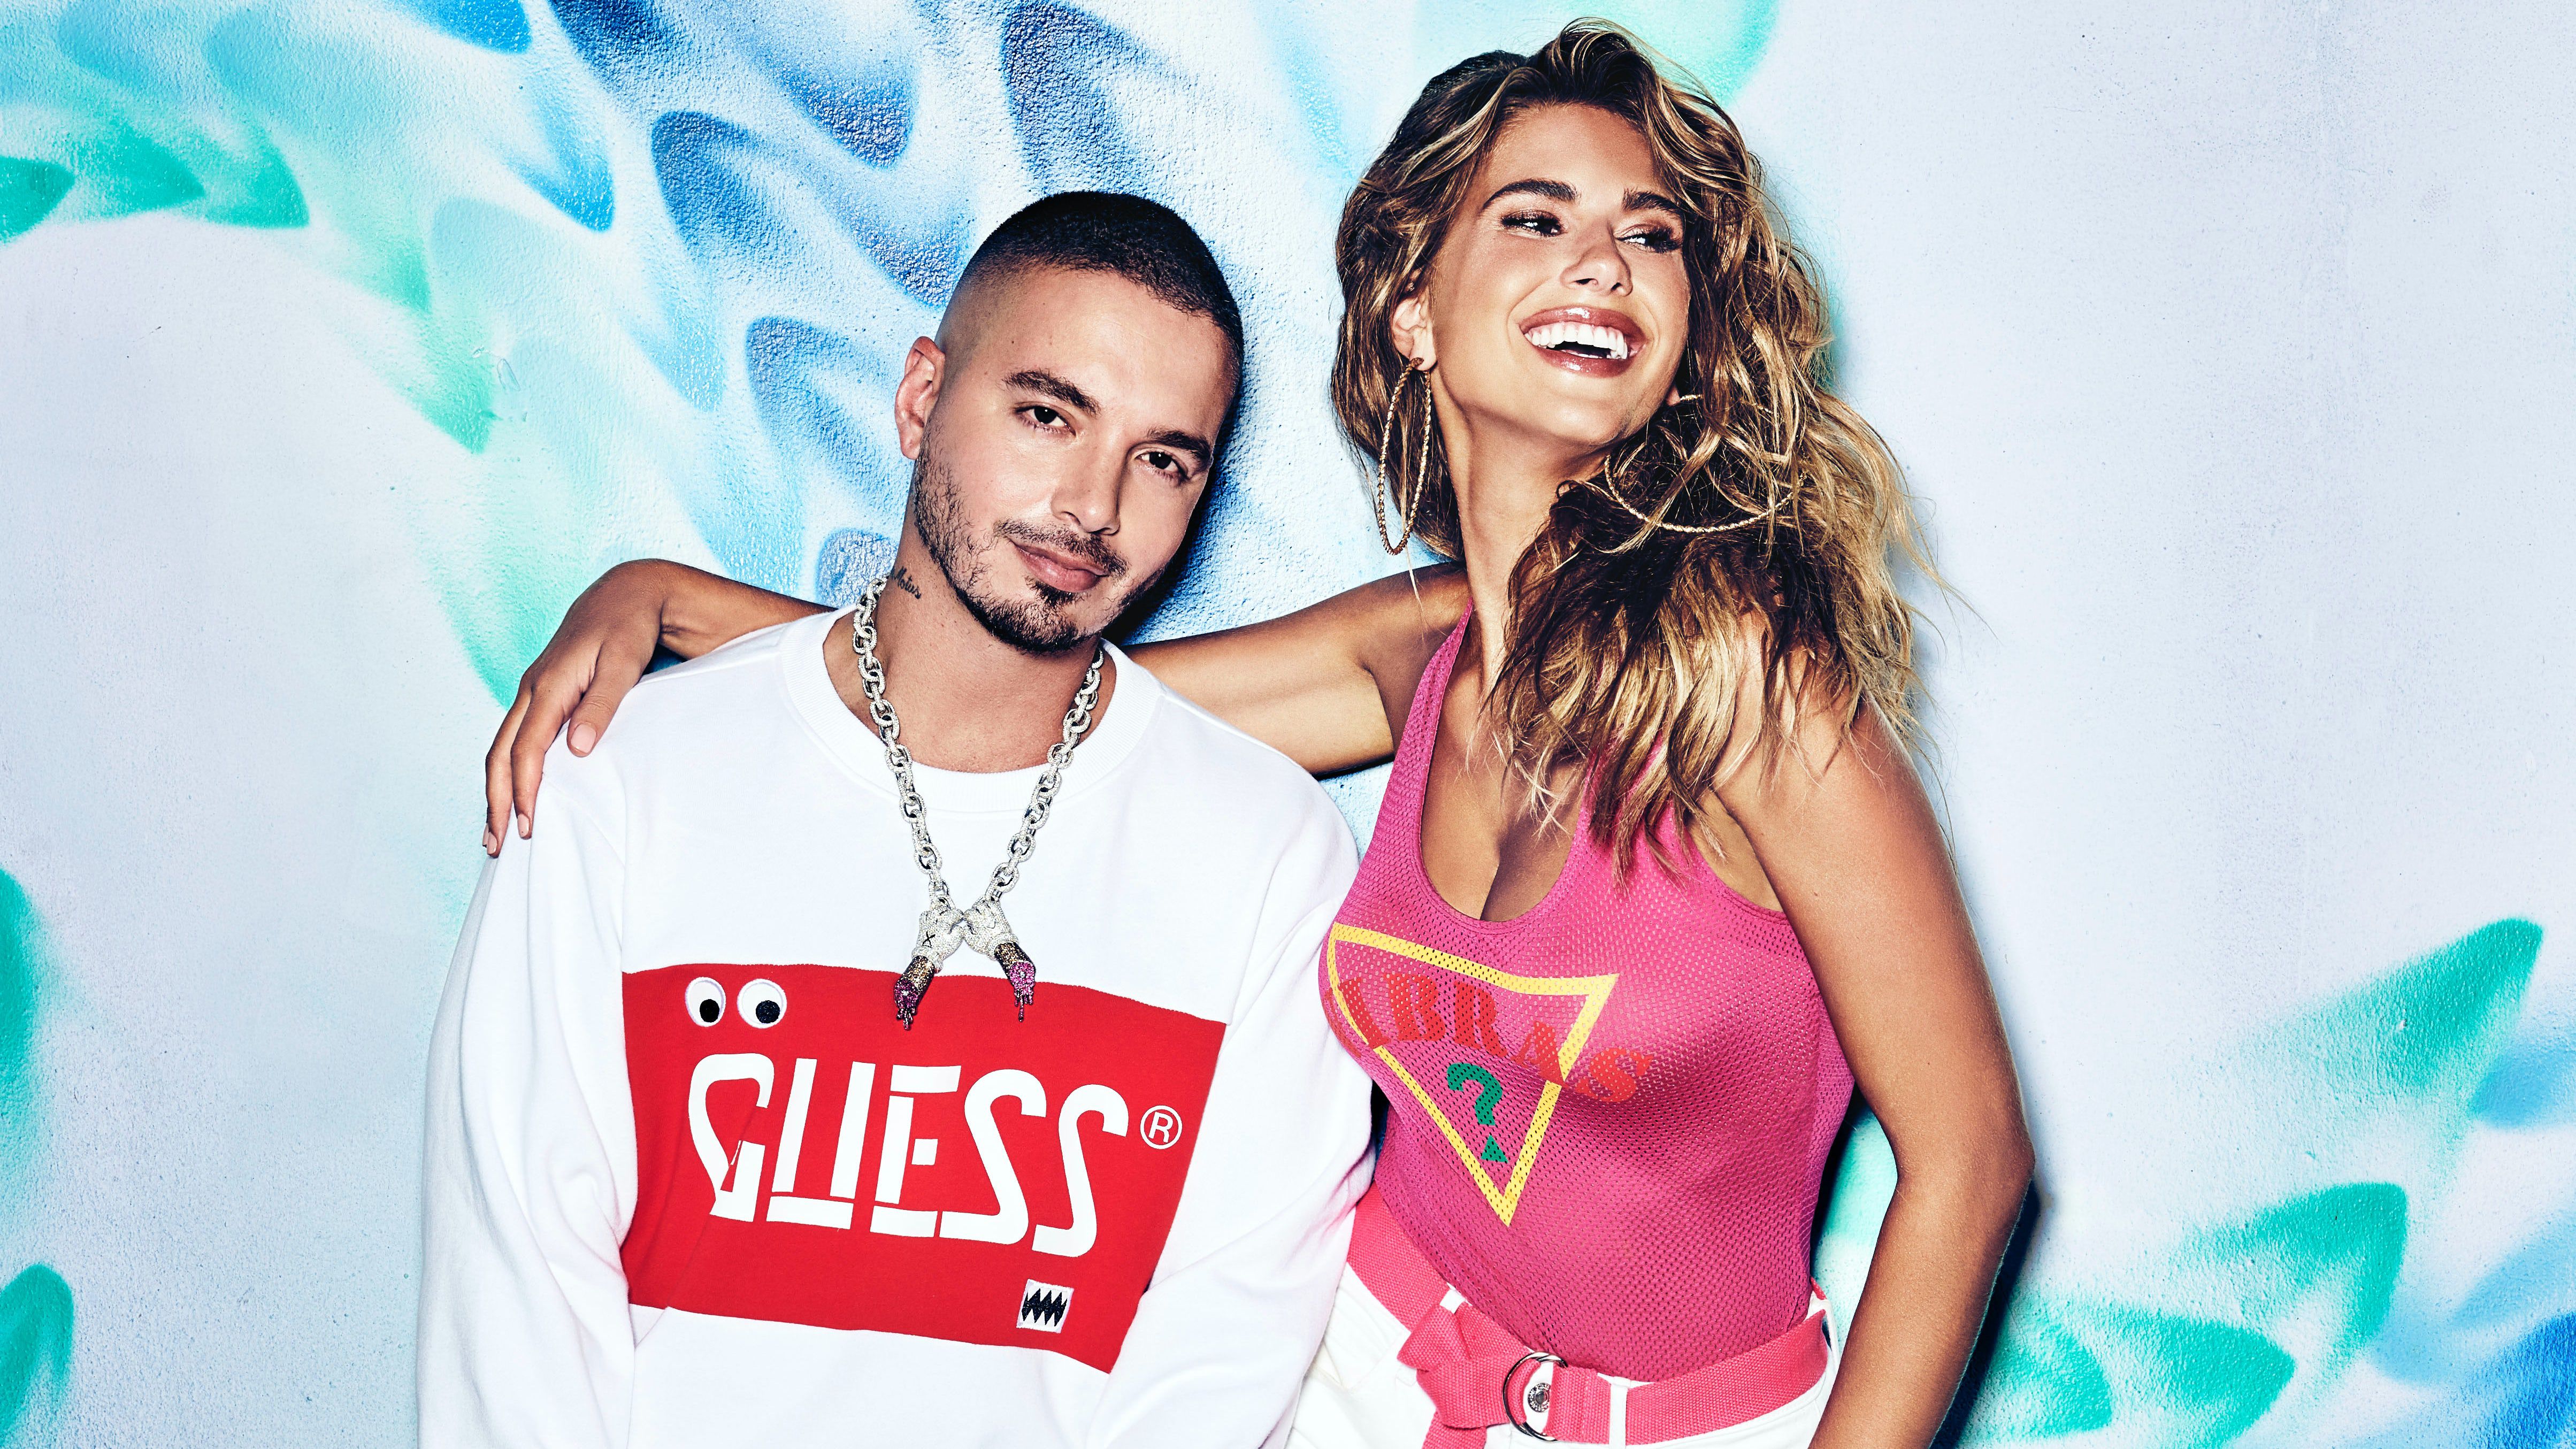 Guess? Goes for Another Round with J Balvin